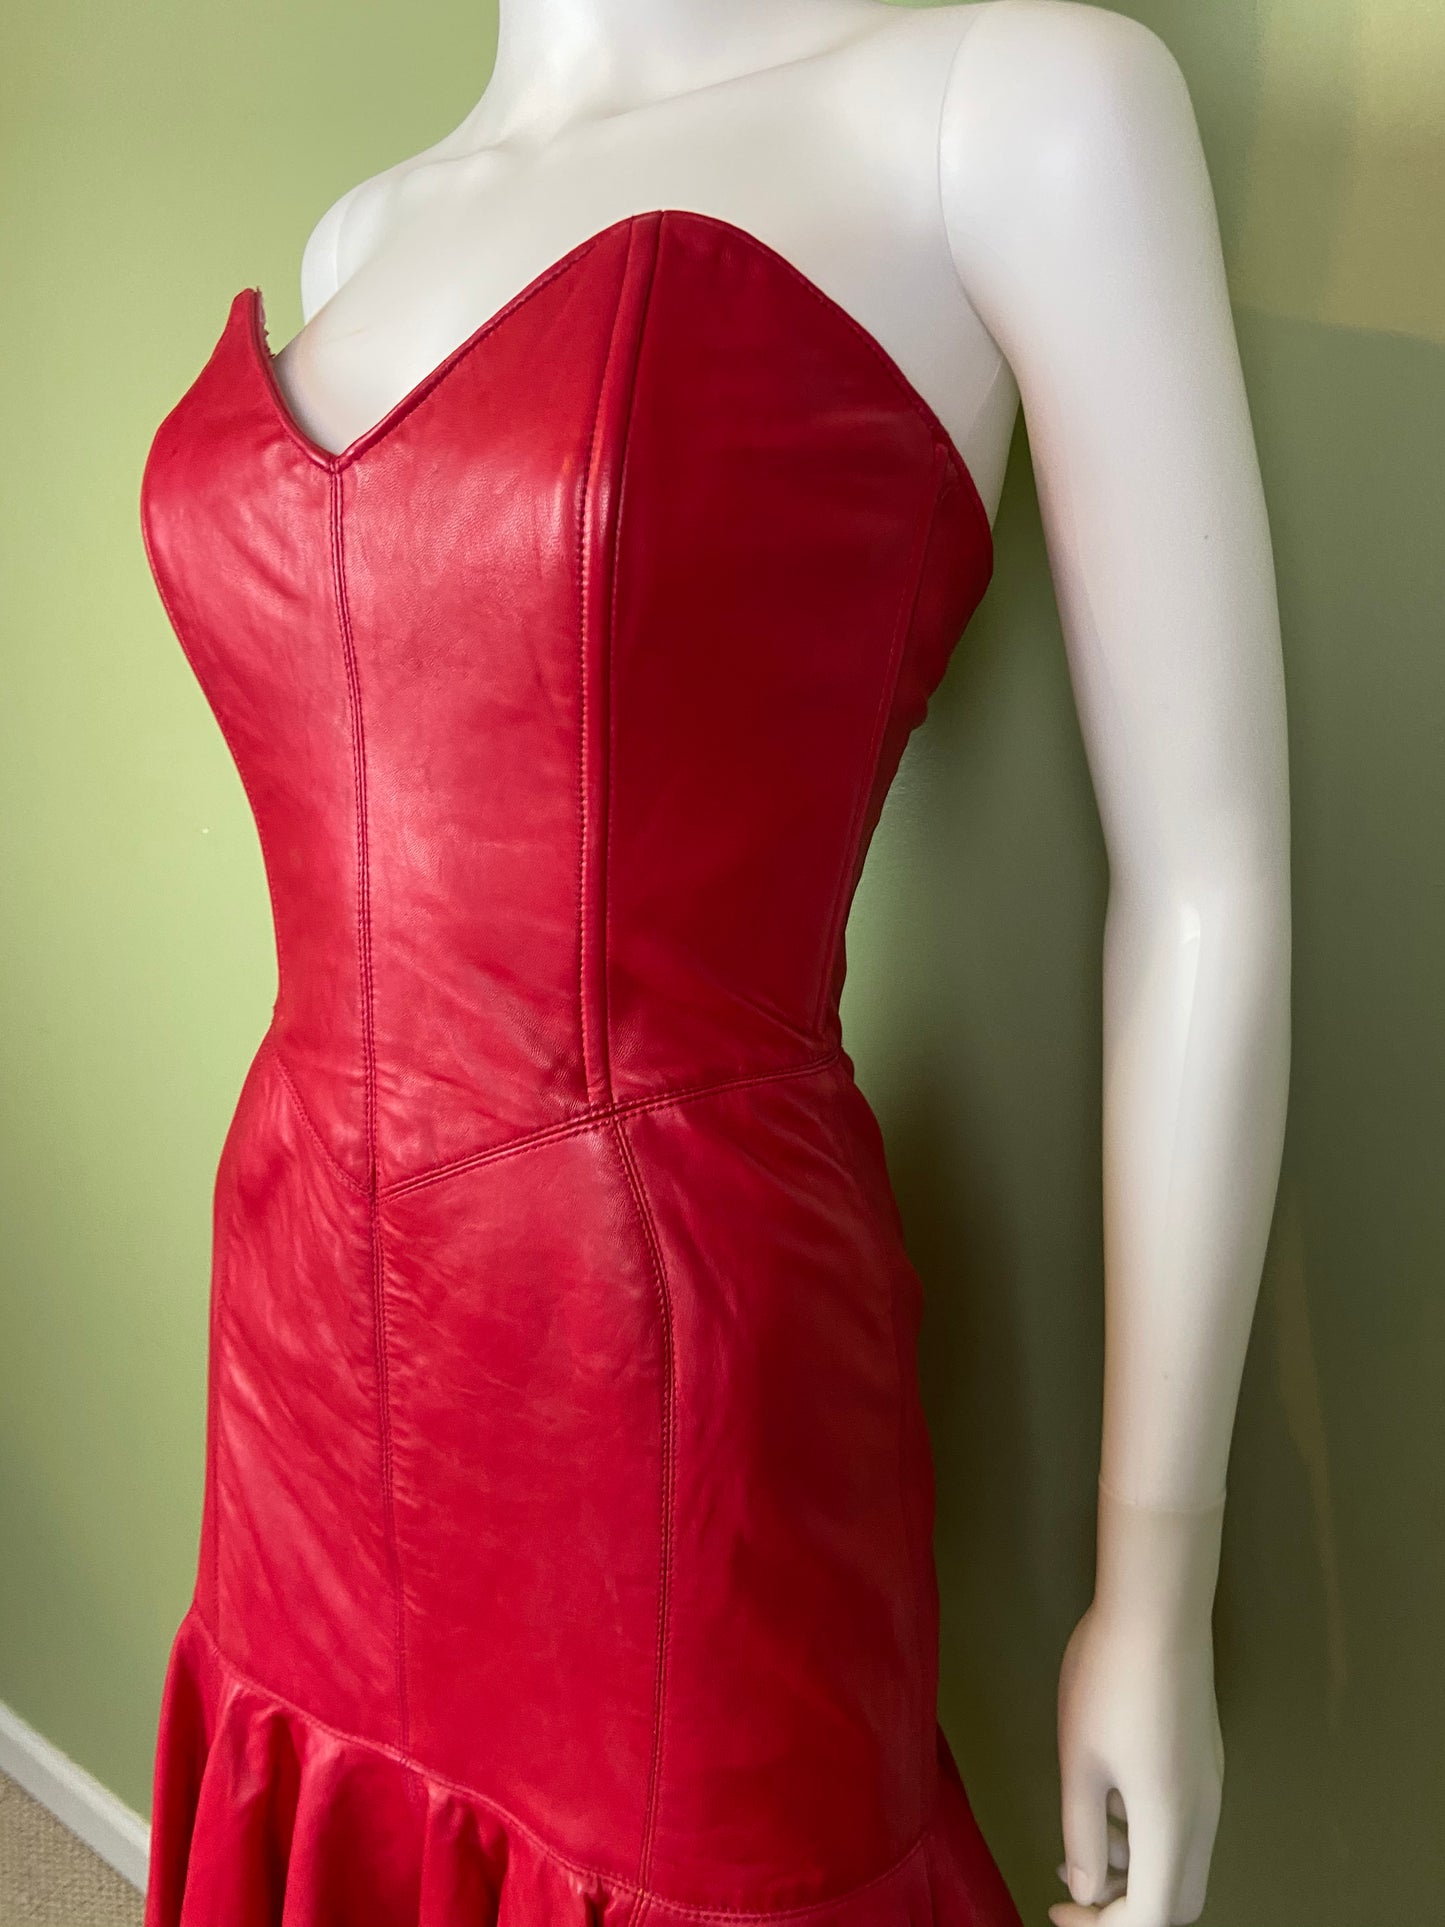 [SOLD] Vintage Michael Hoban Red Leather Bustier Ruffle Mini Dress